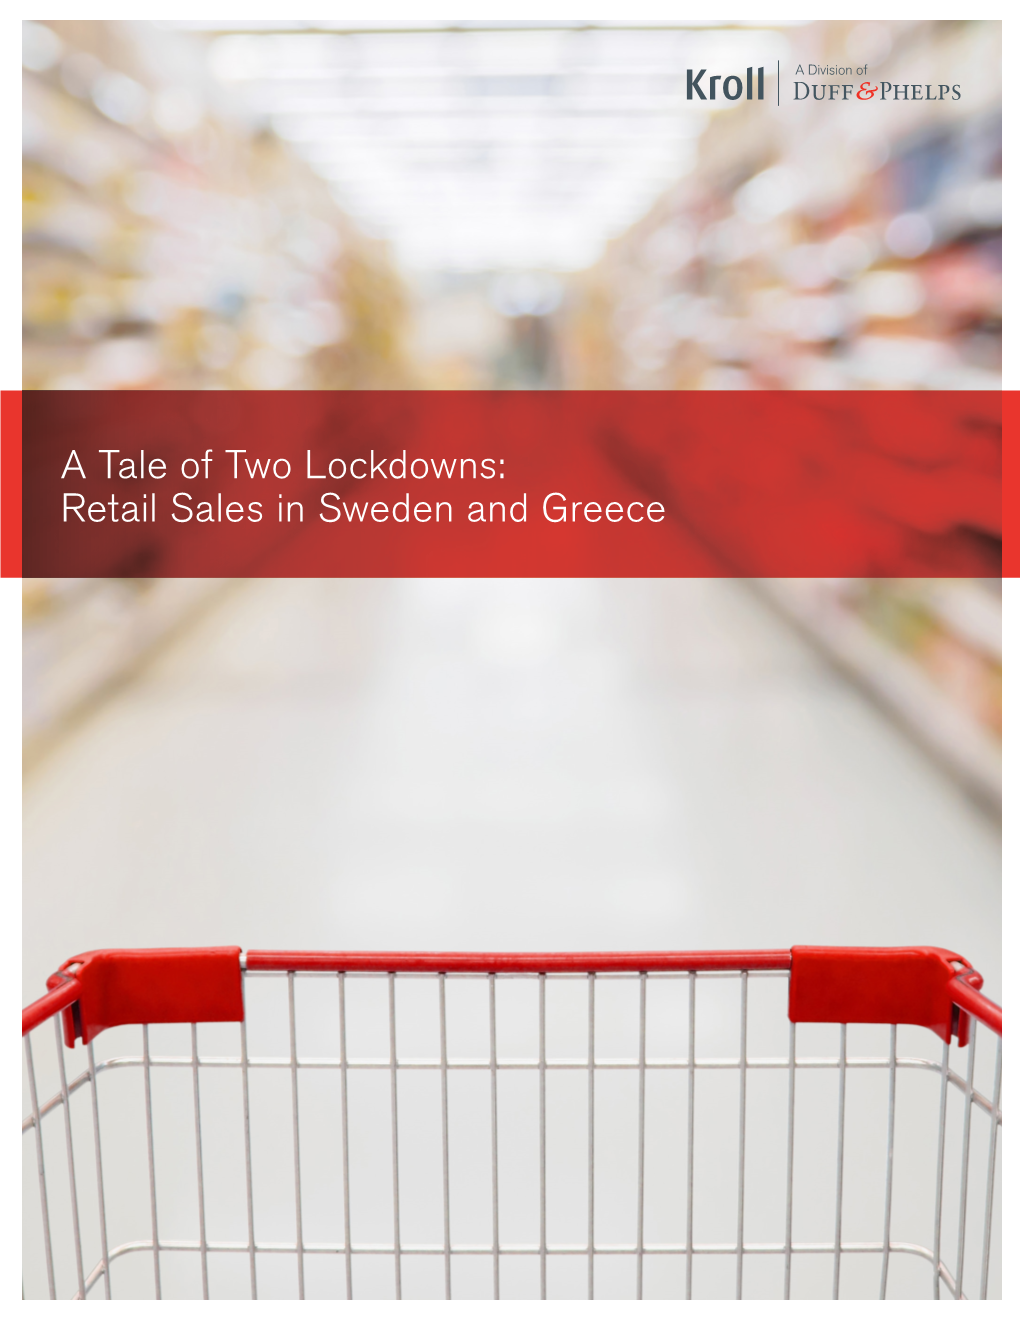 Retail Sales in Sweden and Greece